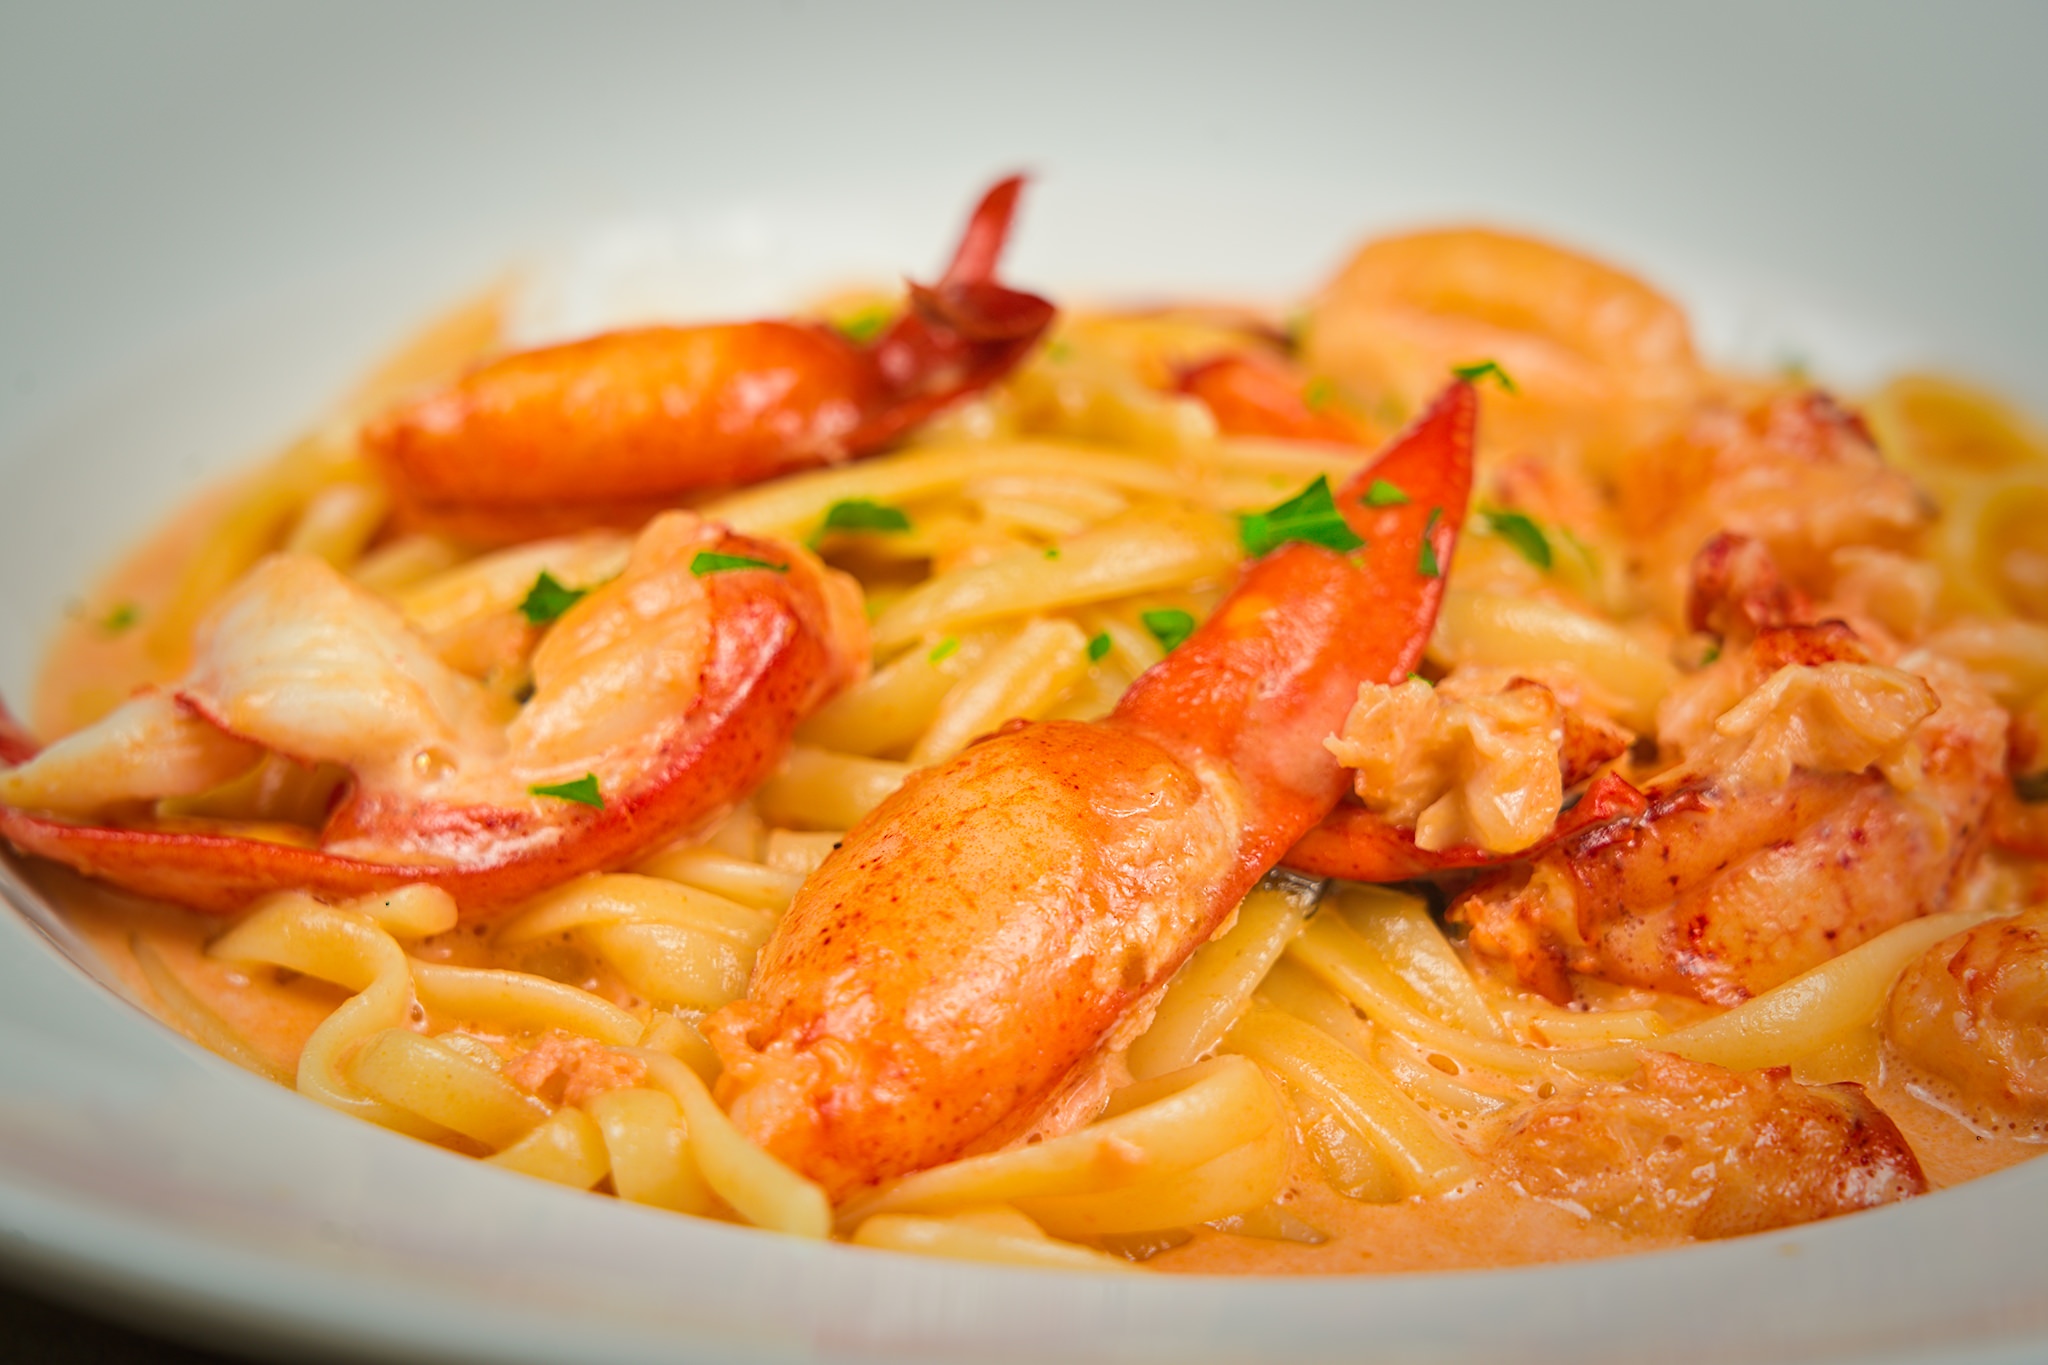 Linguini with lobster in a light tomato cream sauce.